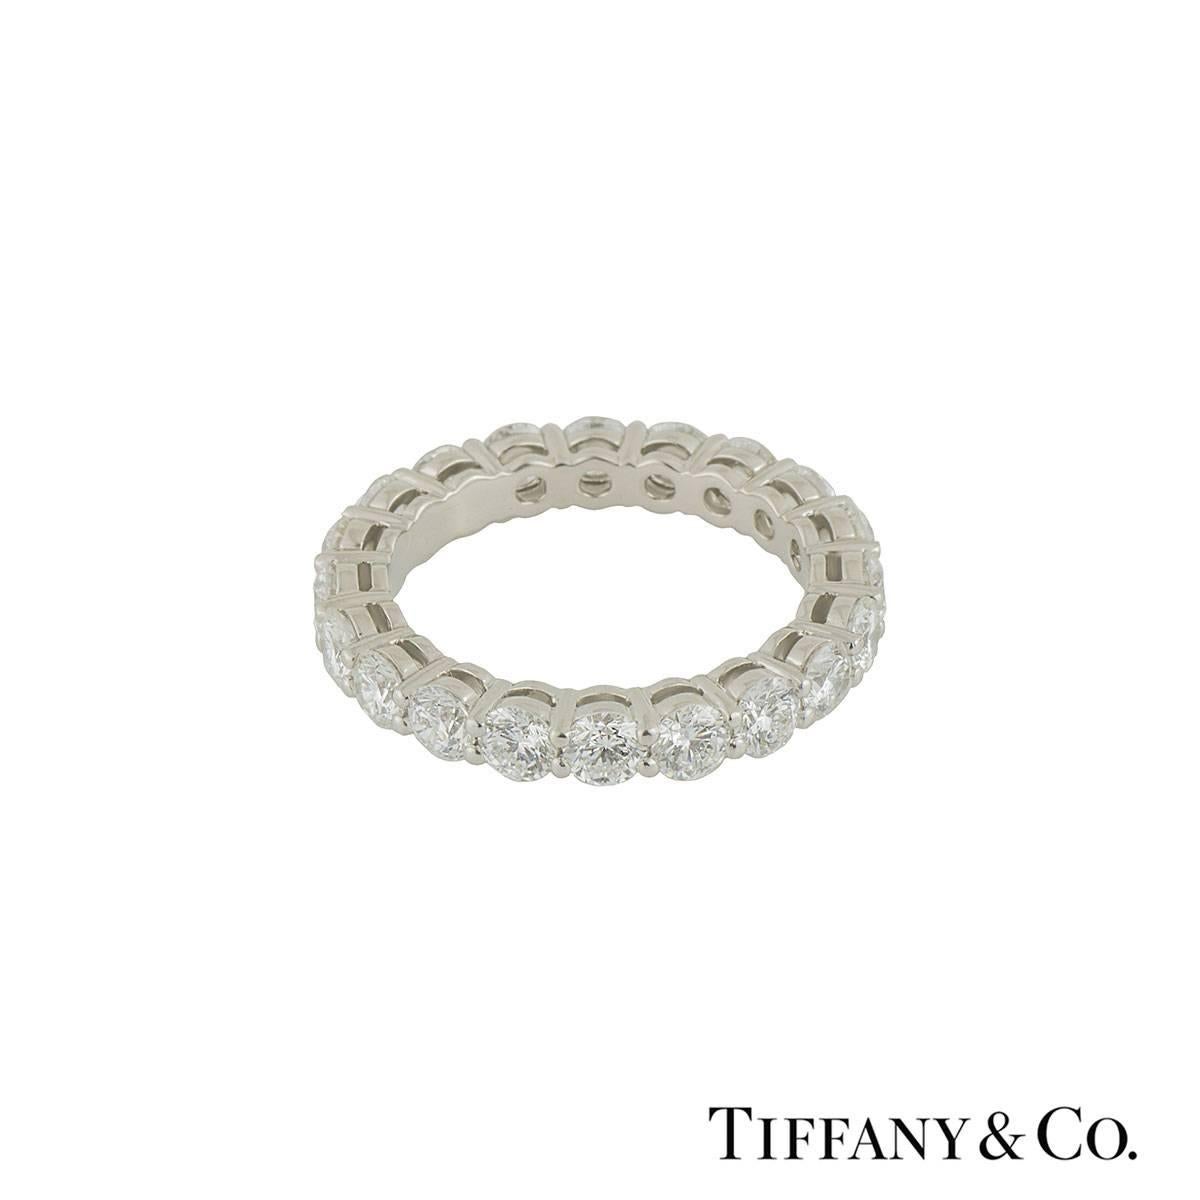 A sparkly platinum Tiffany & Co. full diamond eternity ring from the Embrace collection. The ring comprises of 20 round brilliant cut diamonds in a shared prong setting with a total weight of 3.18ct, F+ colour and VS+ clarity. The ring measures